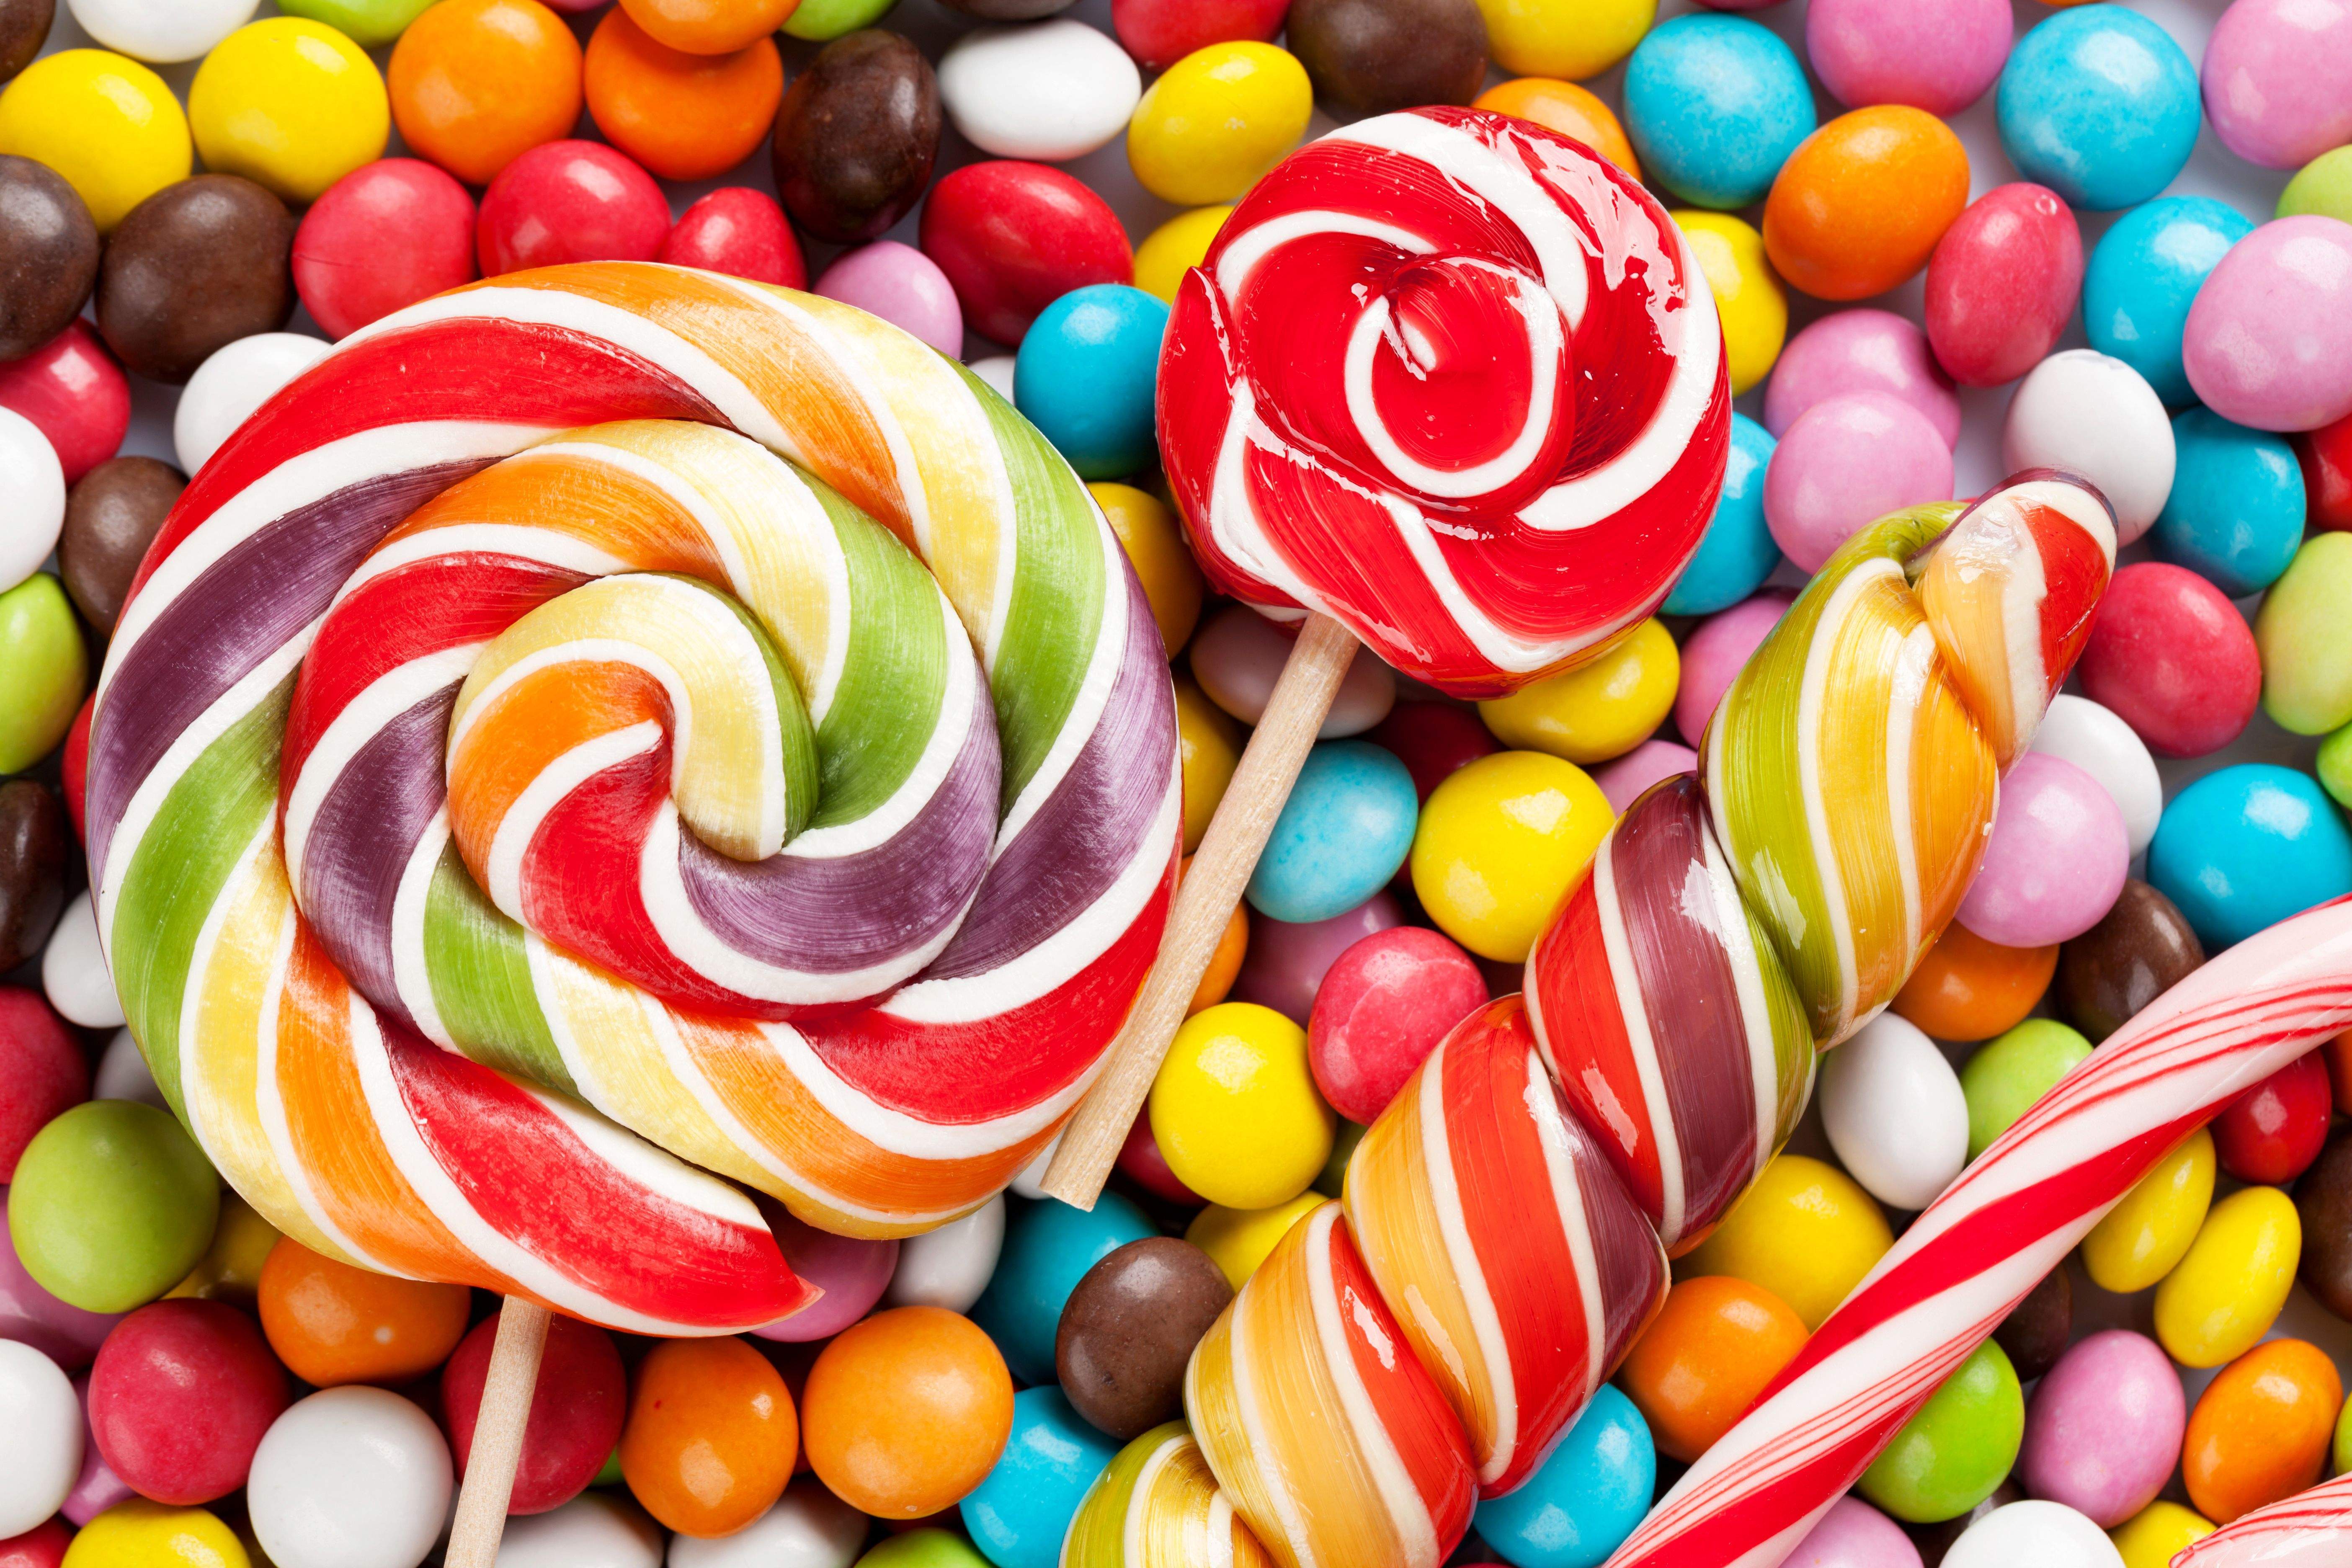 Colorful candies and lollipops download and share beautiful image in best a...